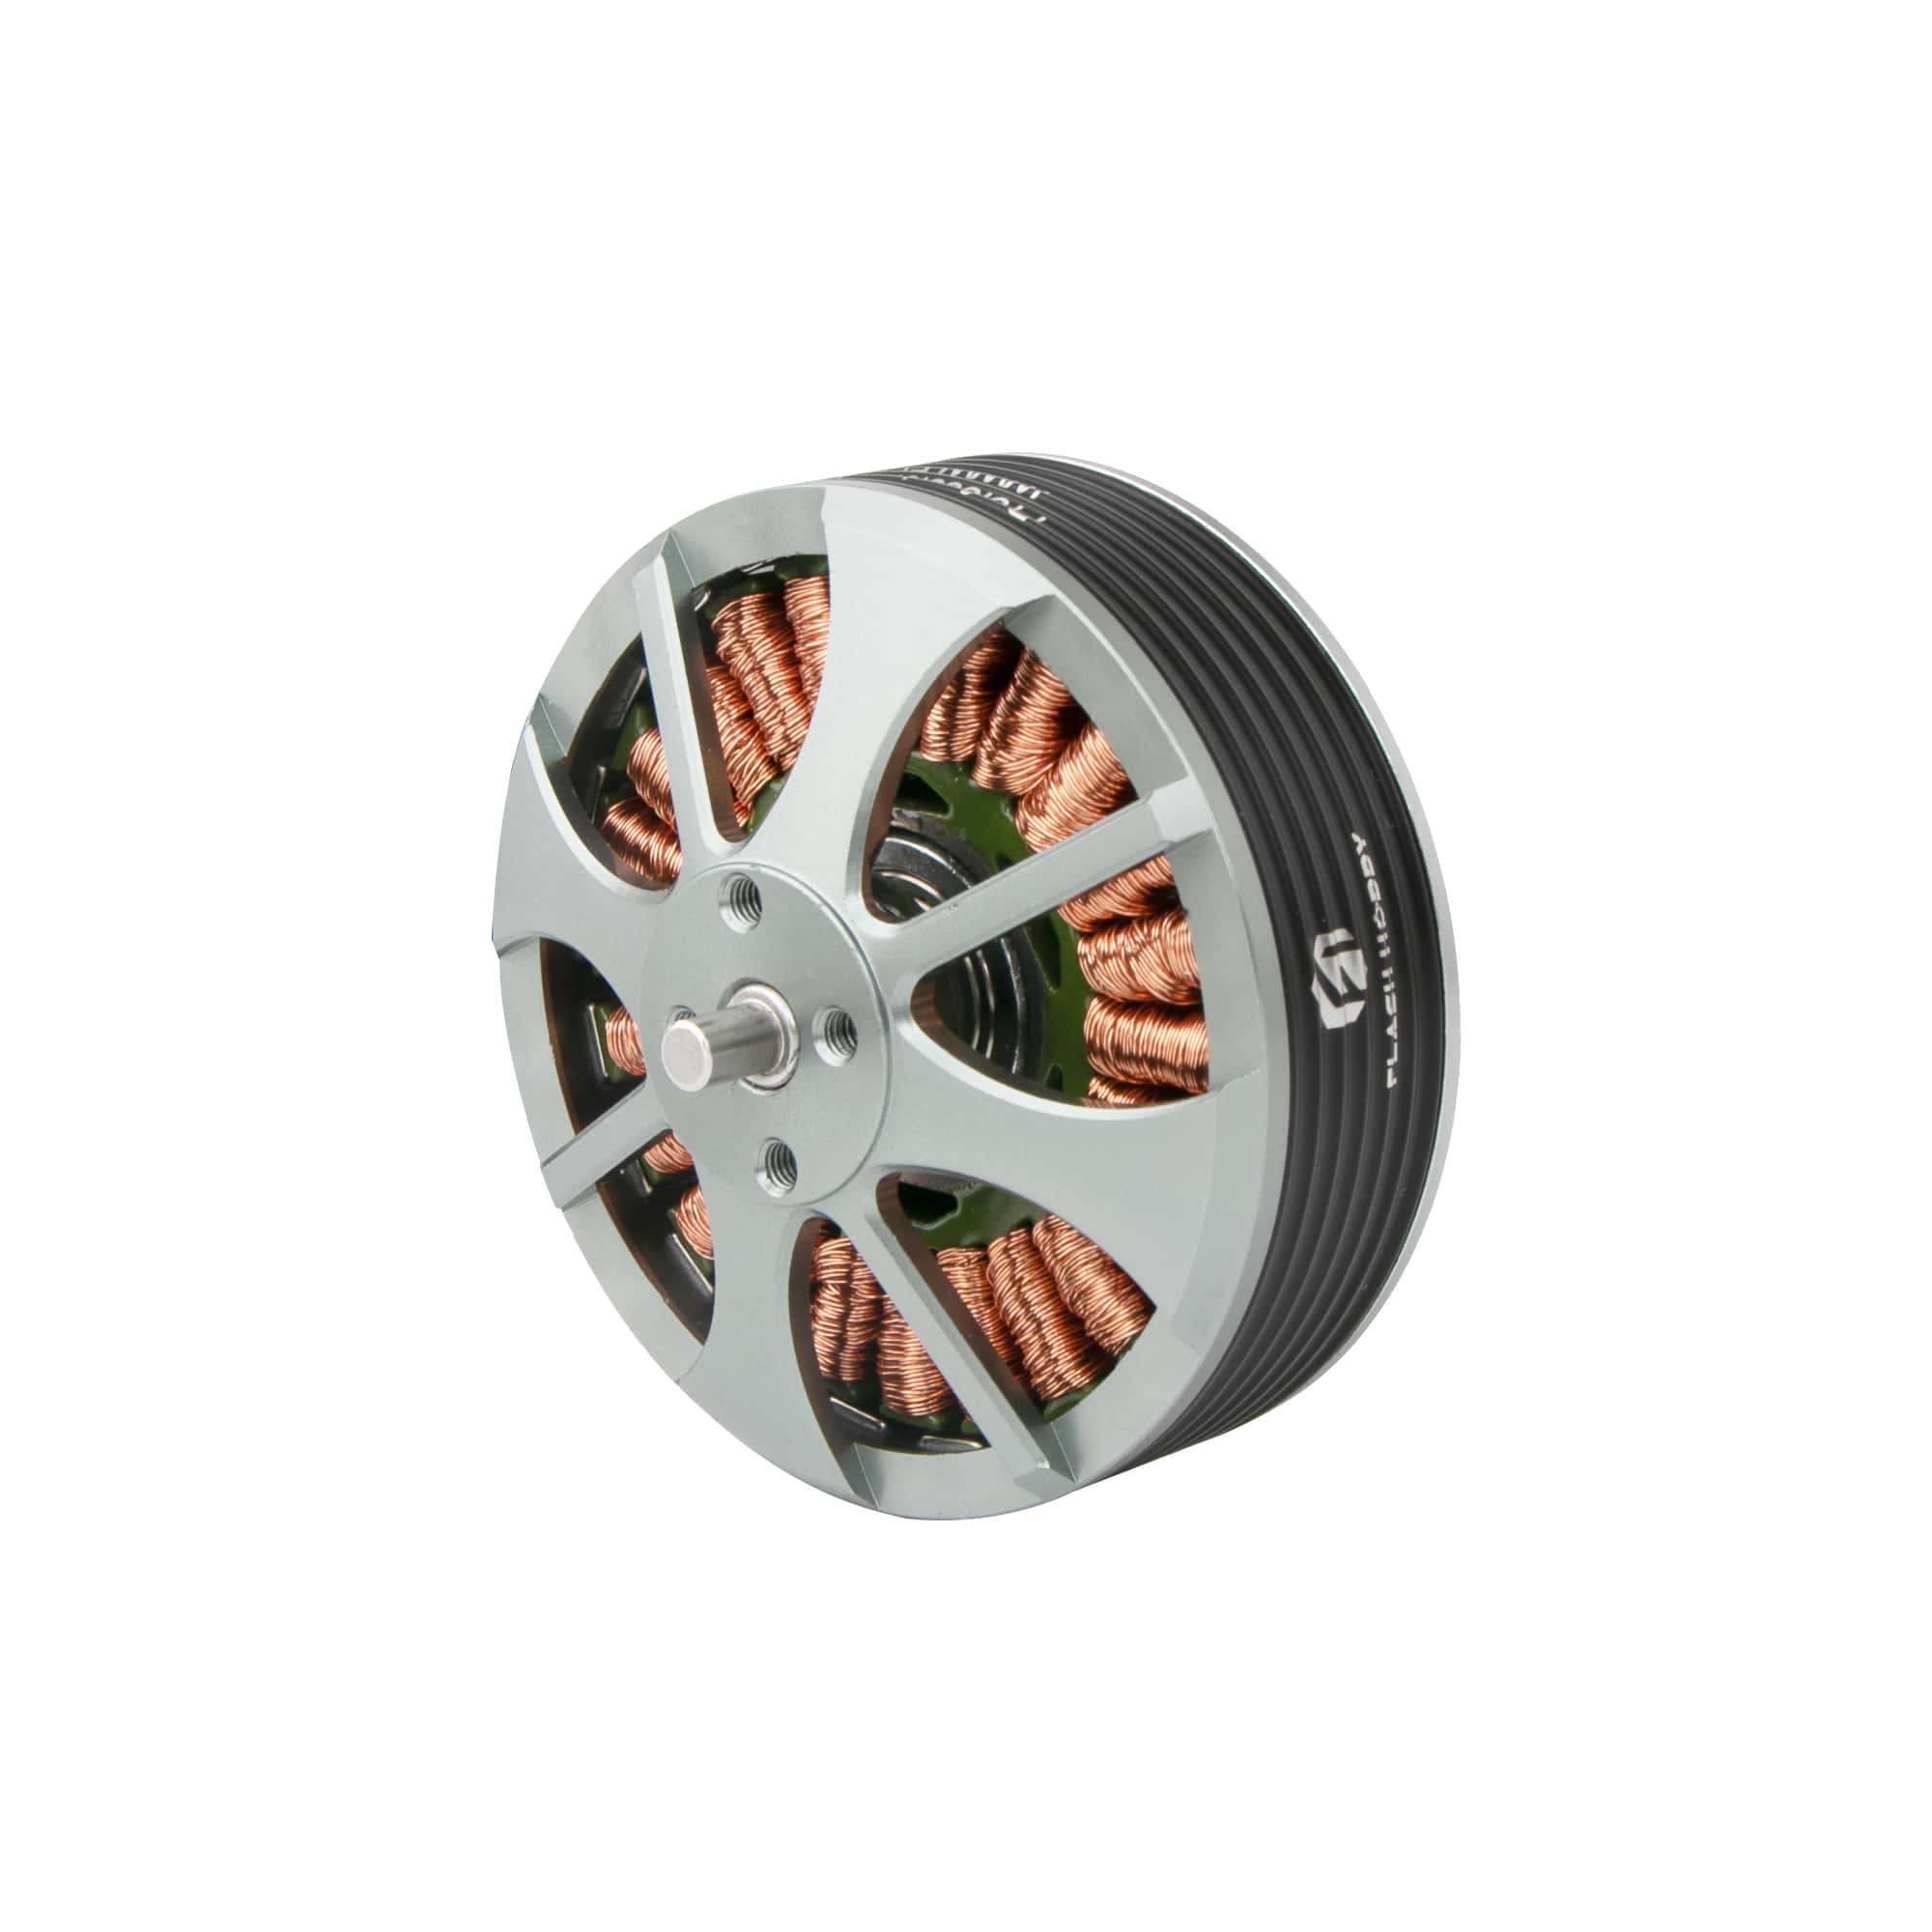 What are the uses of Multirotor Motor?